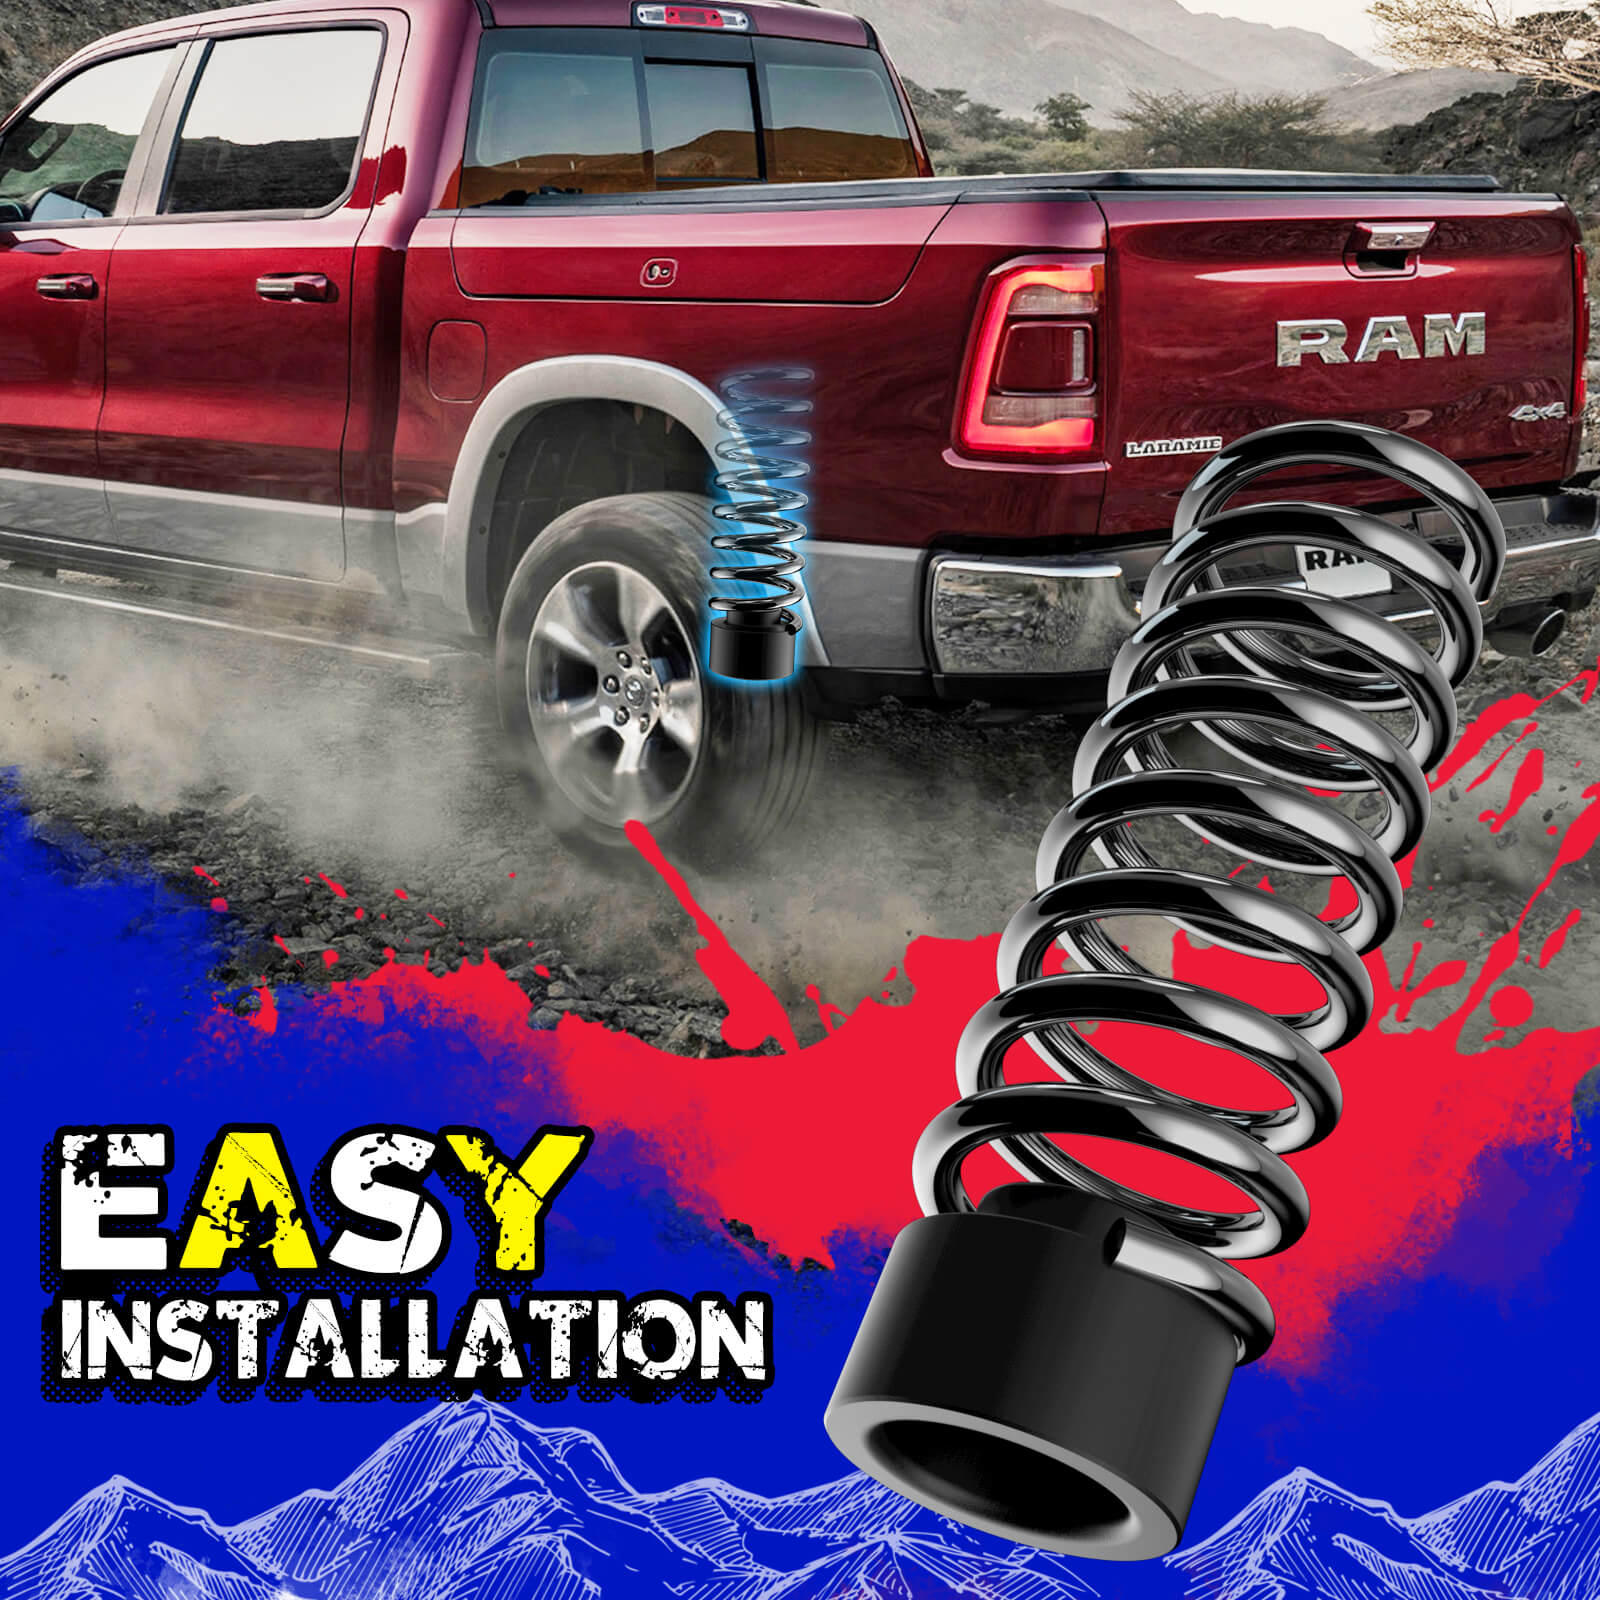 Ram 1500 Full Leveling Lift Kits 3" Front and 2" Rear for 2009-2023 Dodge Ram 1500 4WD